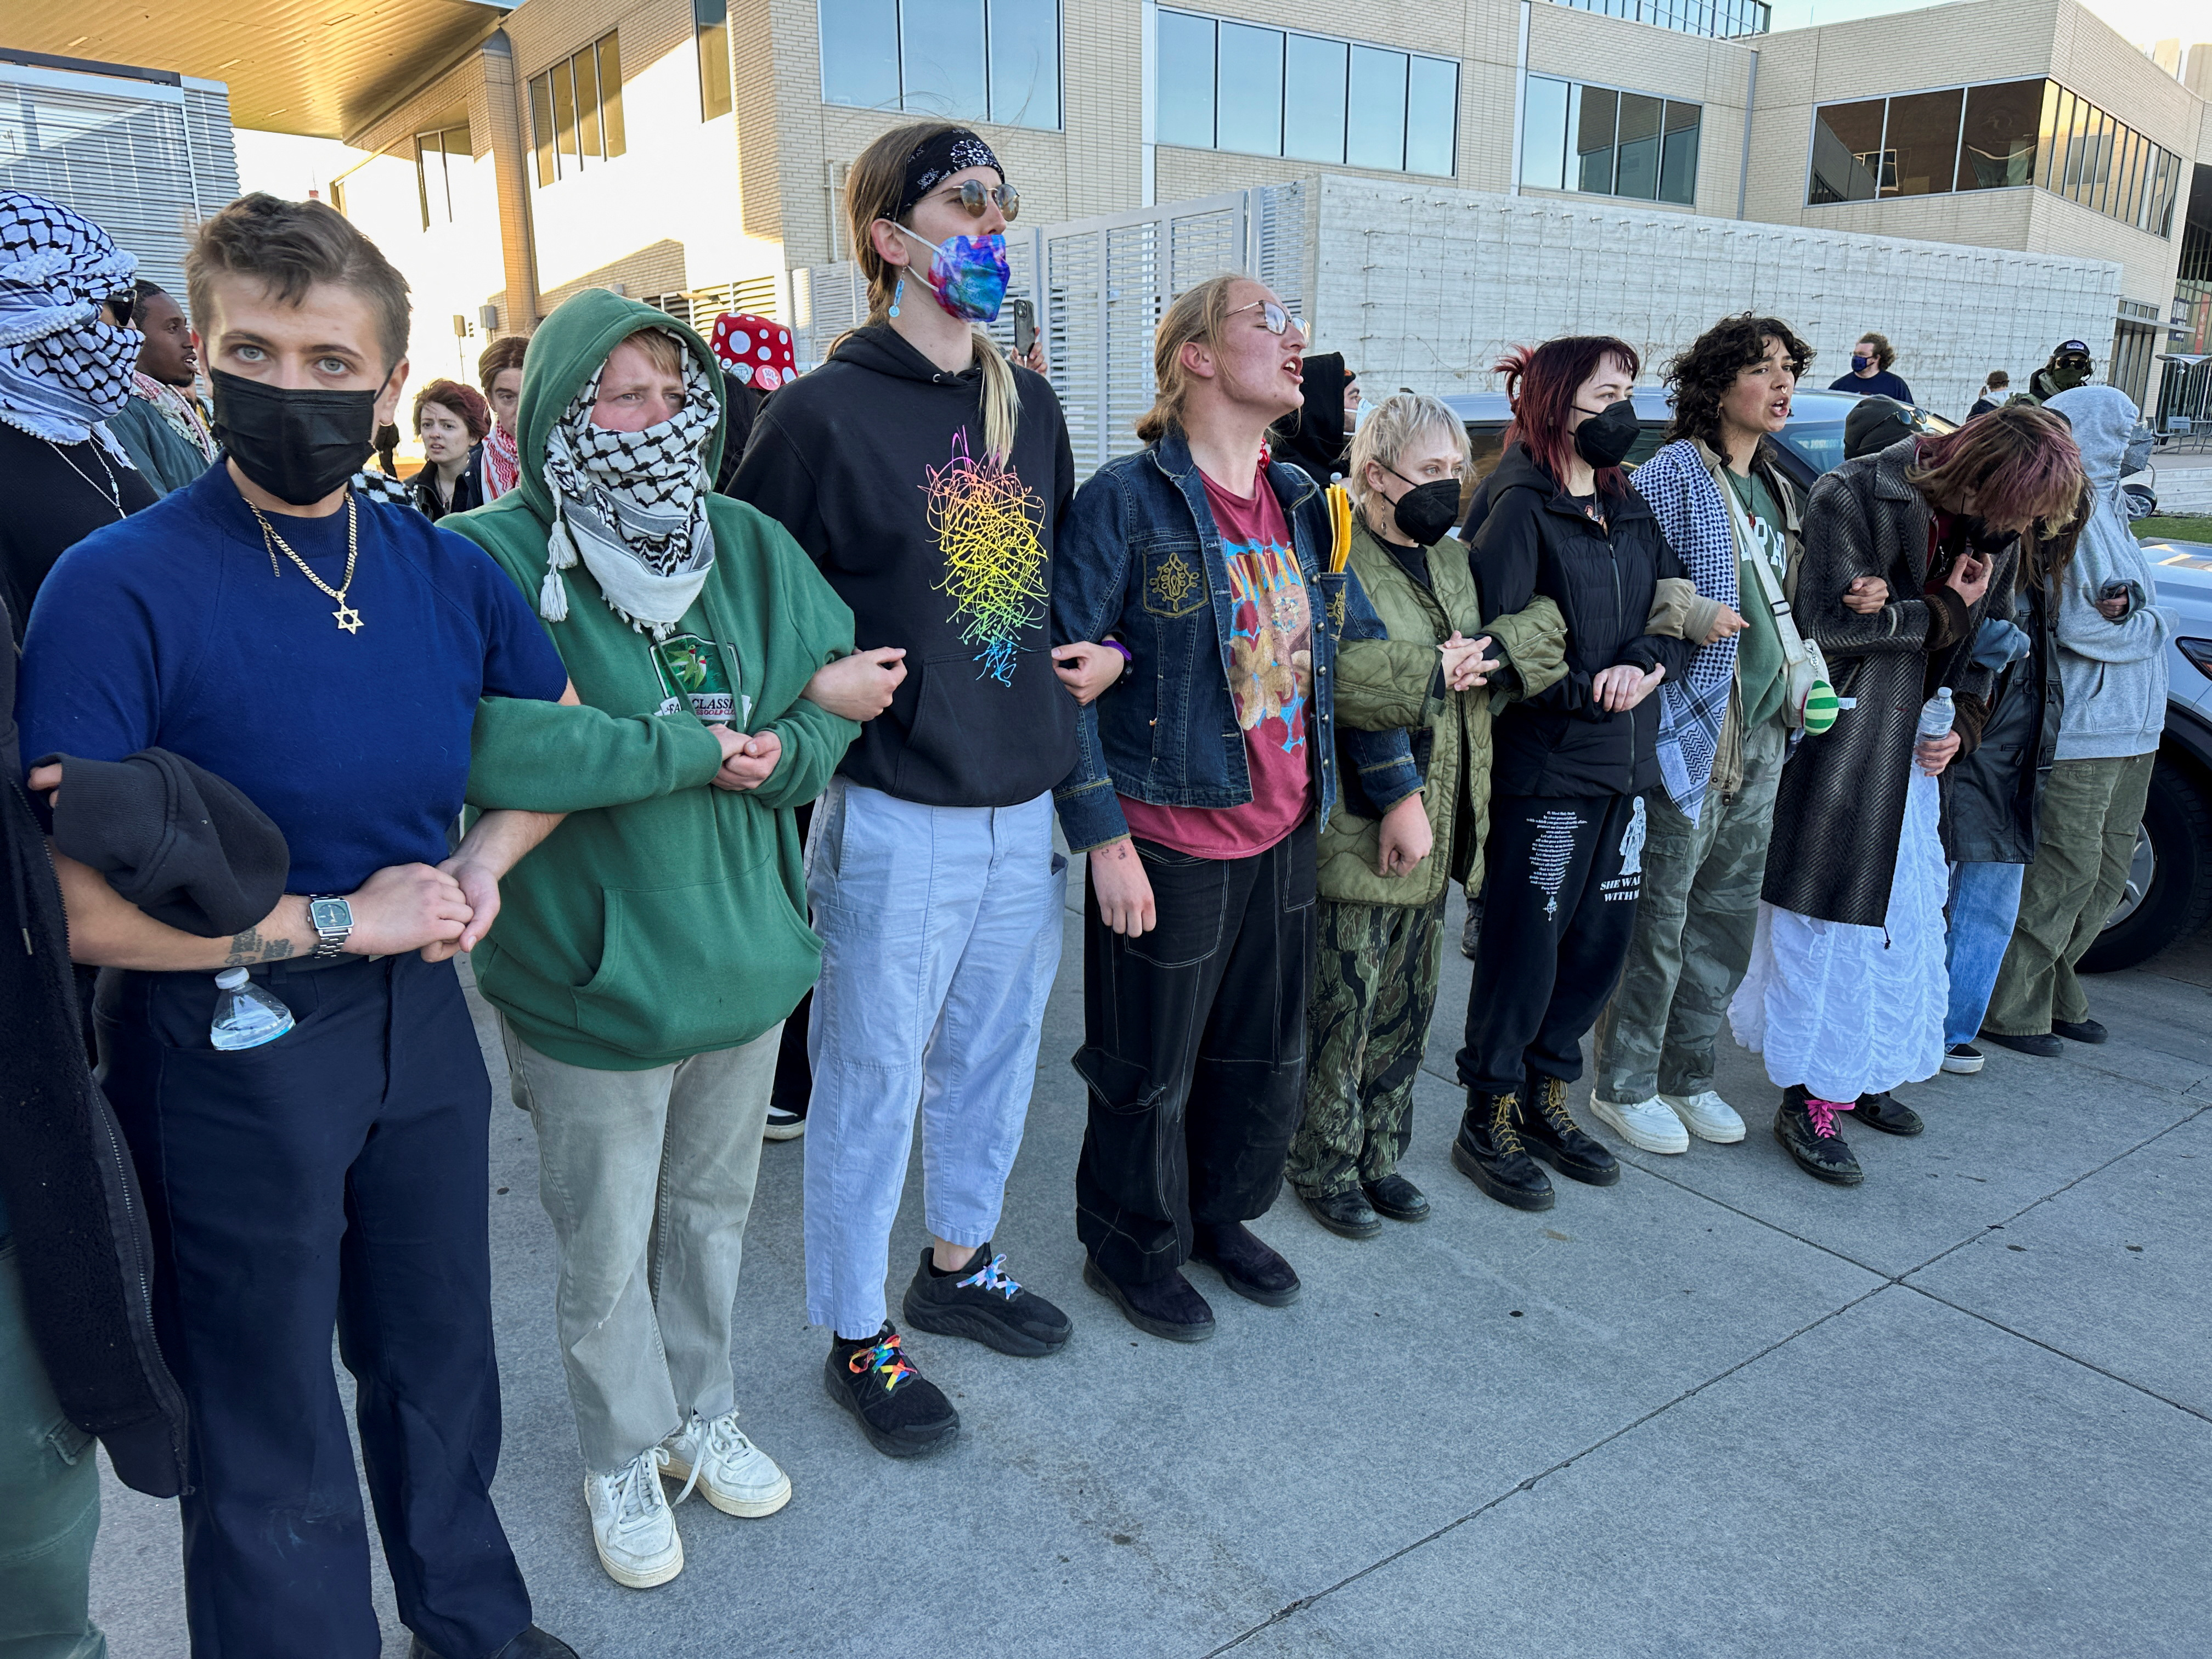 Protest in support of Palestinians, at Auraria Campus in Denver